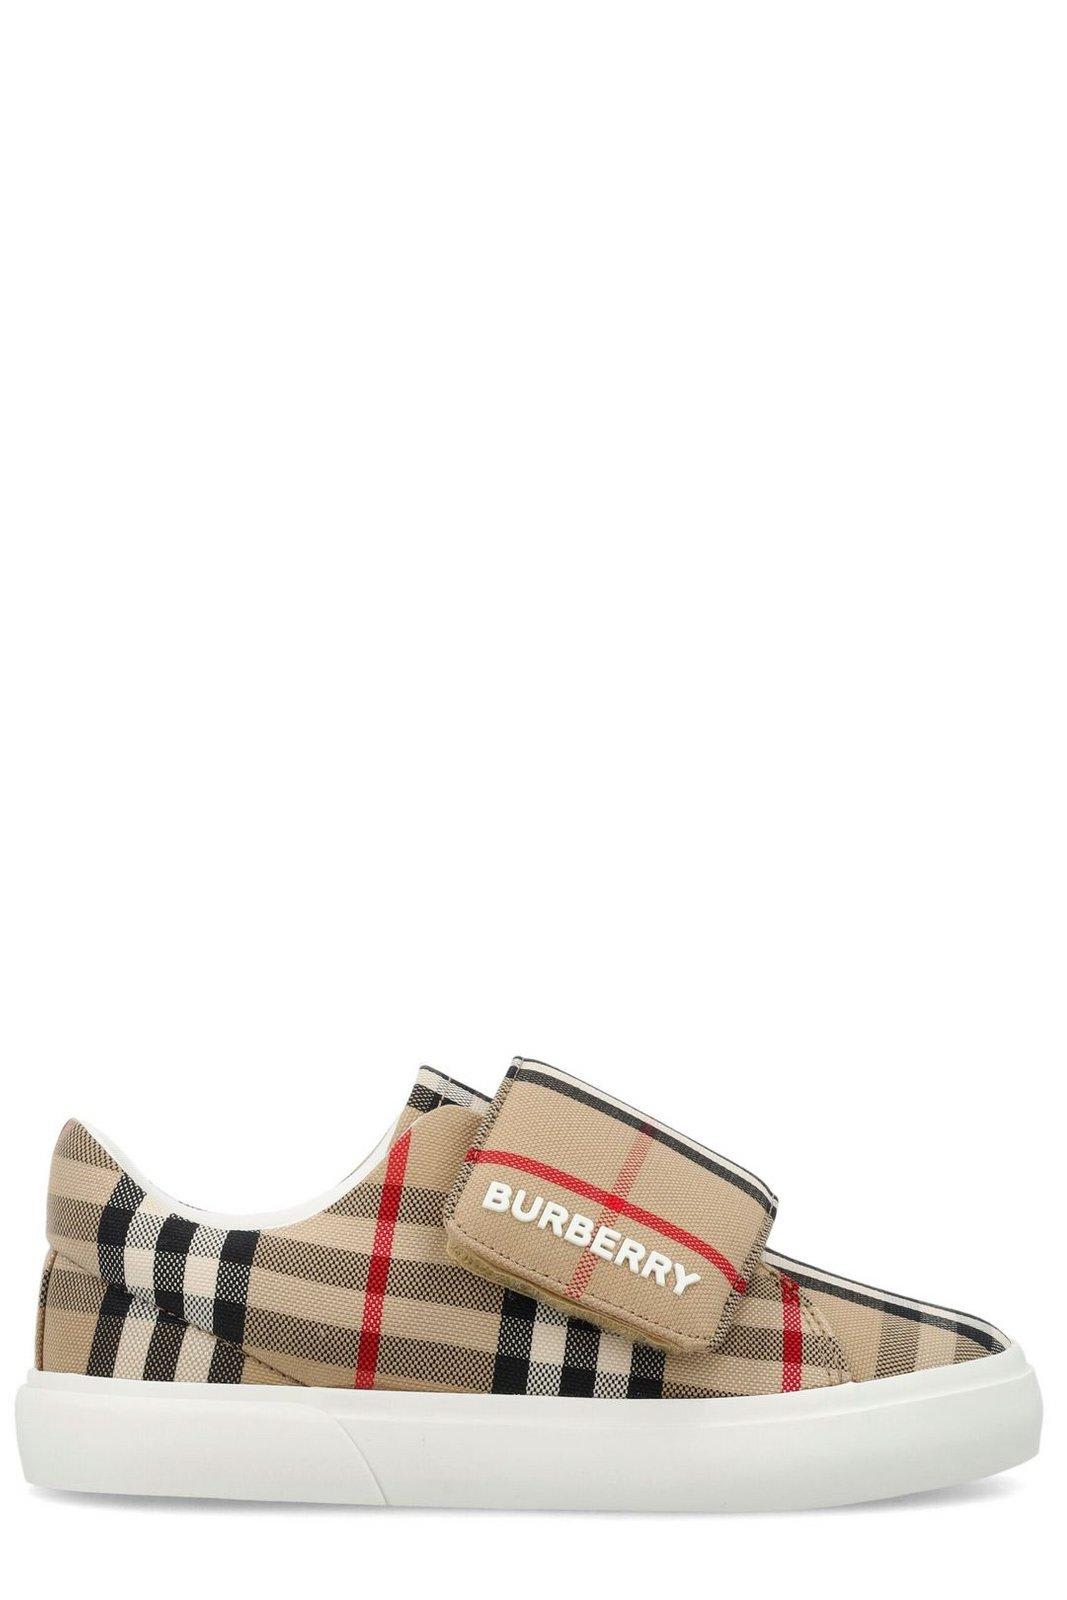 Burberry Kids' James Checked Logo Printed Touch-strap Sneakers